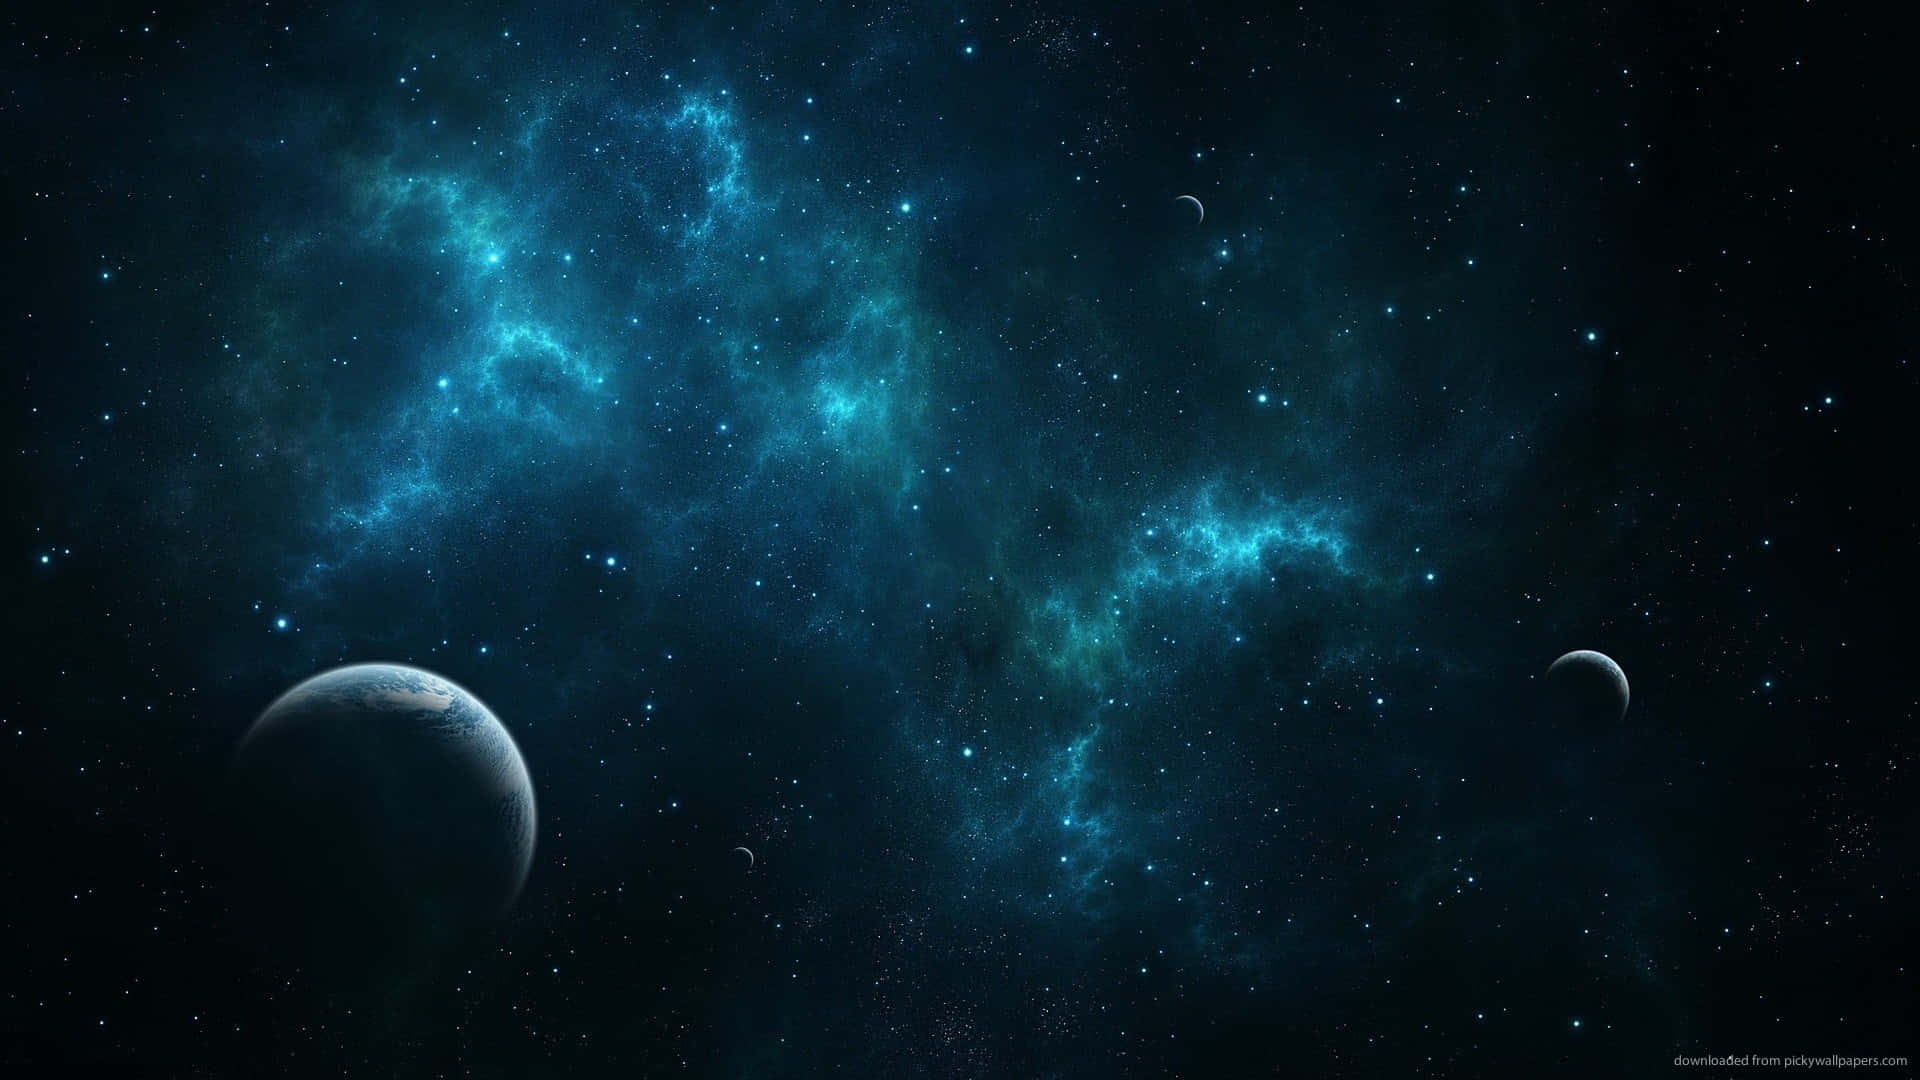 Free Deep Space Hd Wallpaper Downloads, [100+] Deep Space Hd Wallpapers for  FREE 